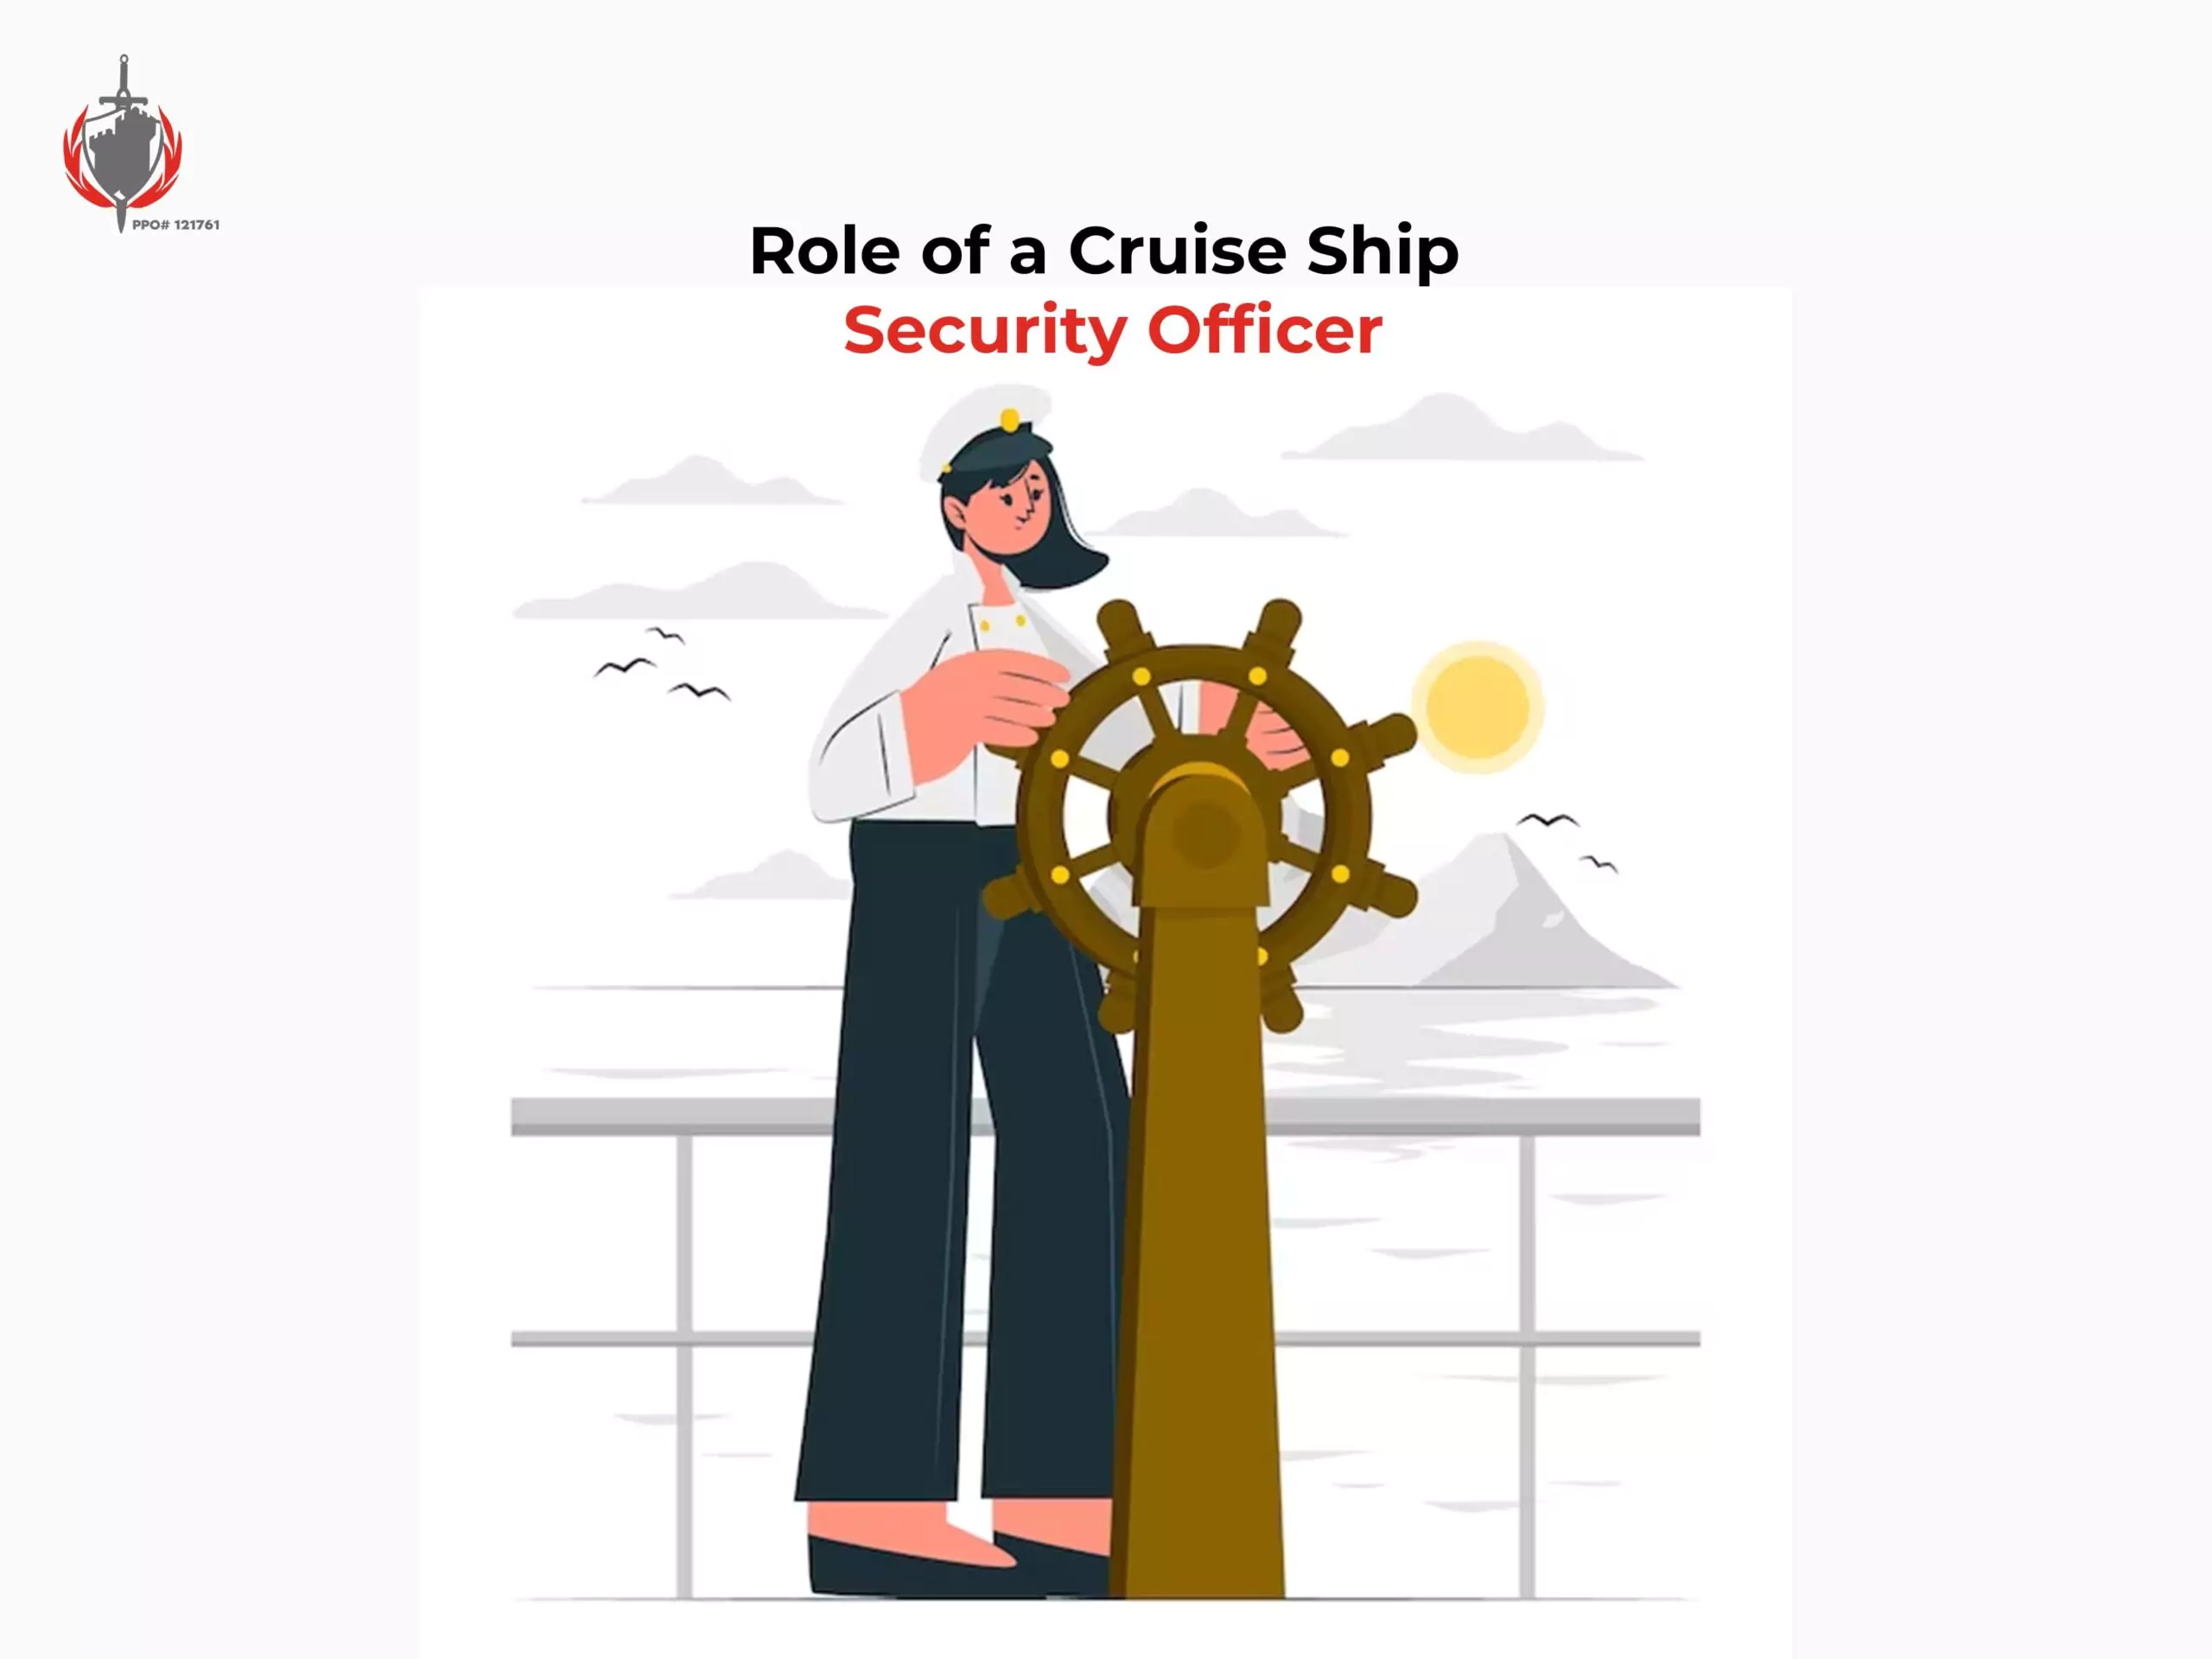 Role of a Cruise Ship Security Officer